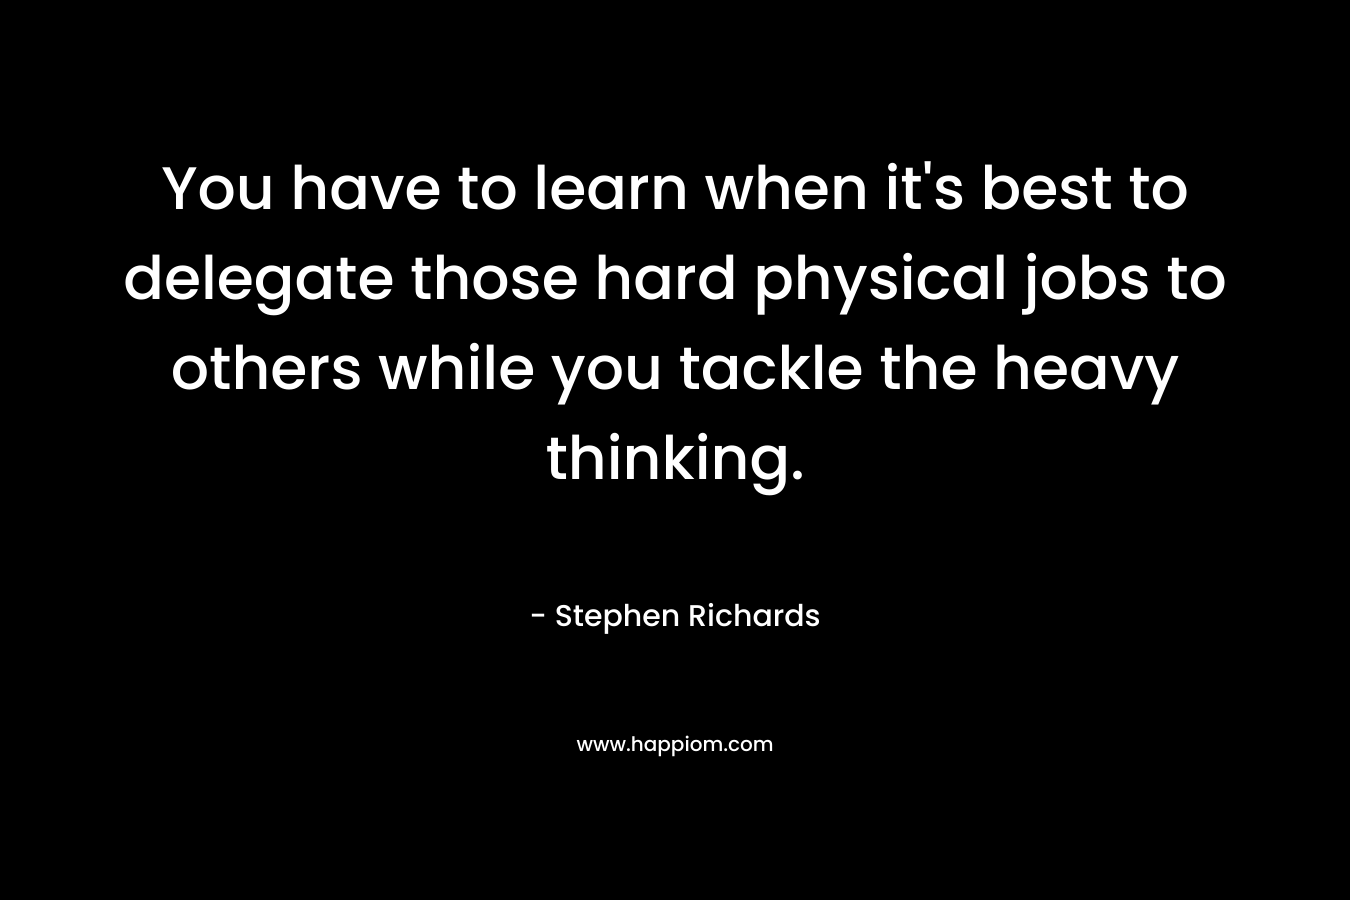 You have to learn when it's best to delegate those hard physical jobs to others while you tackle the heavy thinking.